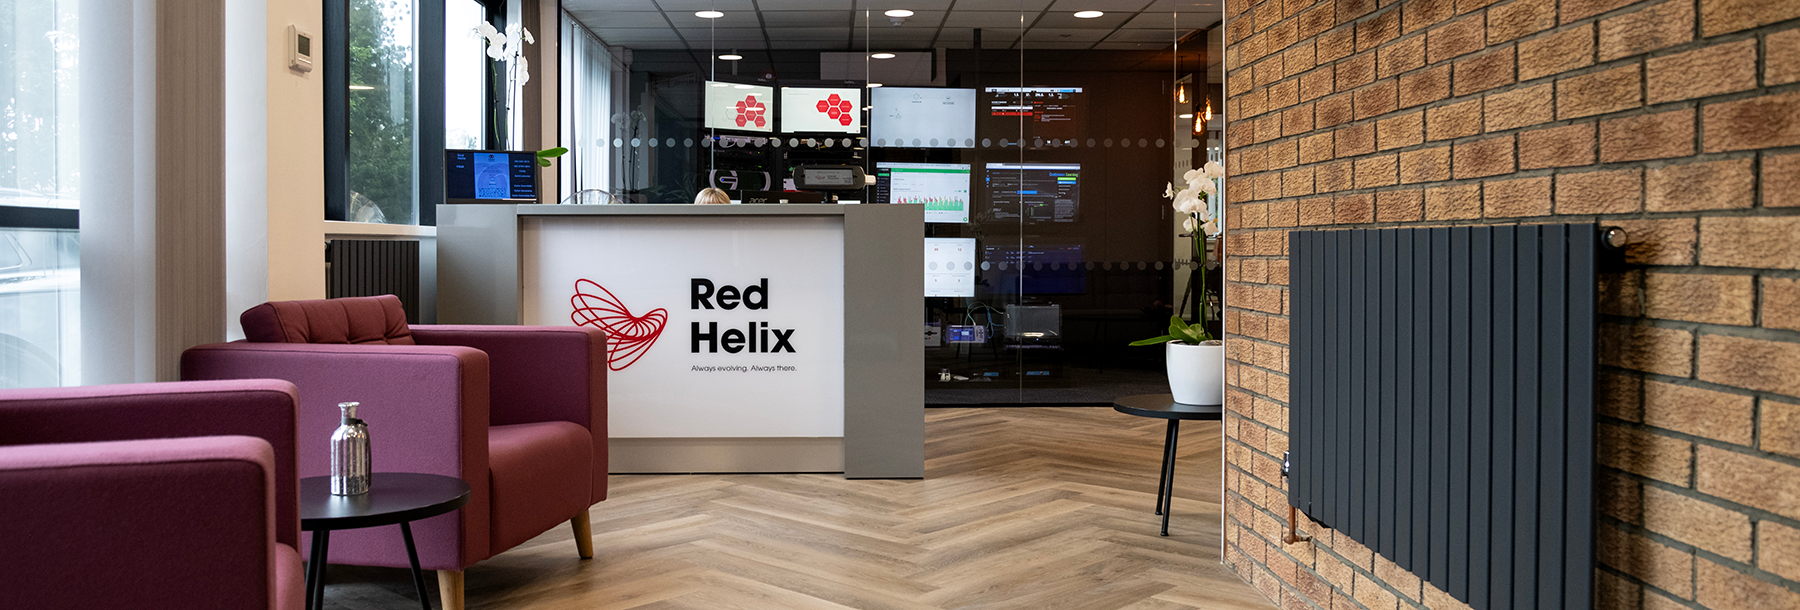 Red Helix warm welcome in reception